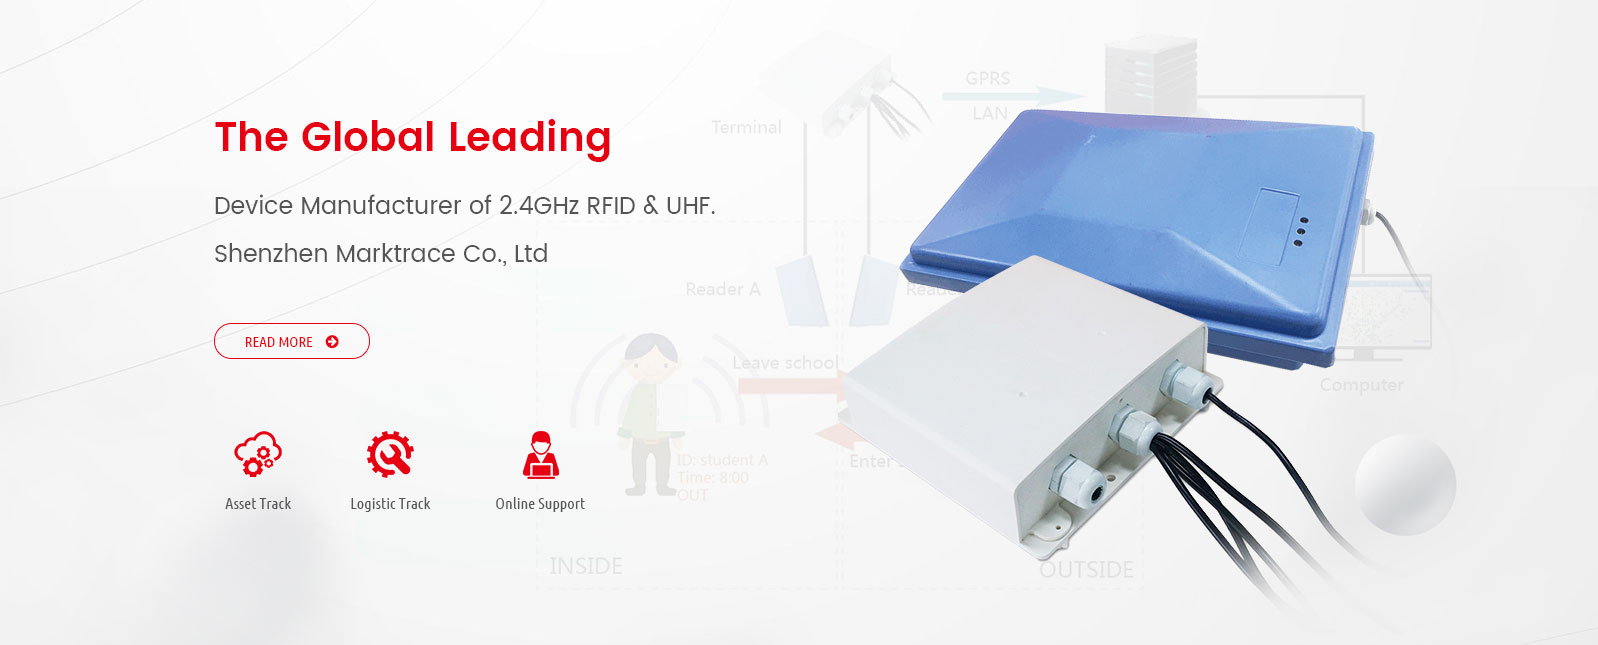 The Global Leading Device Manufacturer of 2.4GHz RFID & UHF